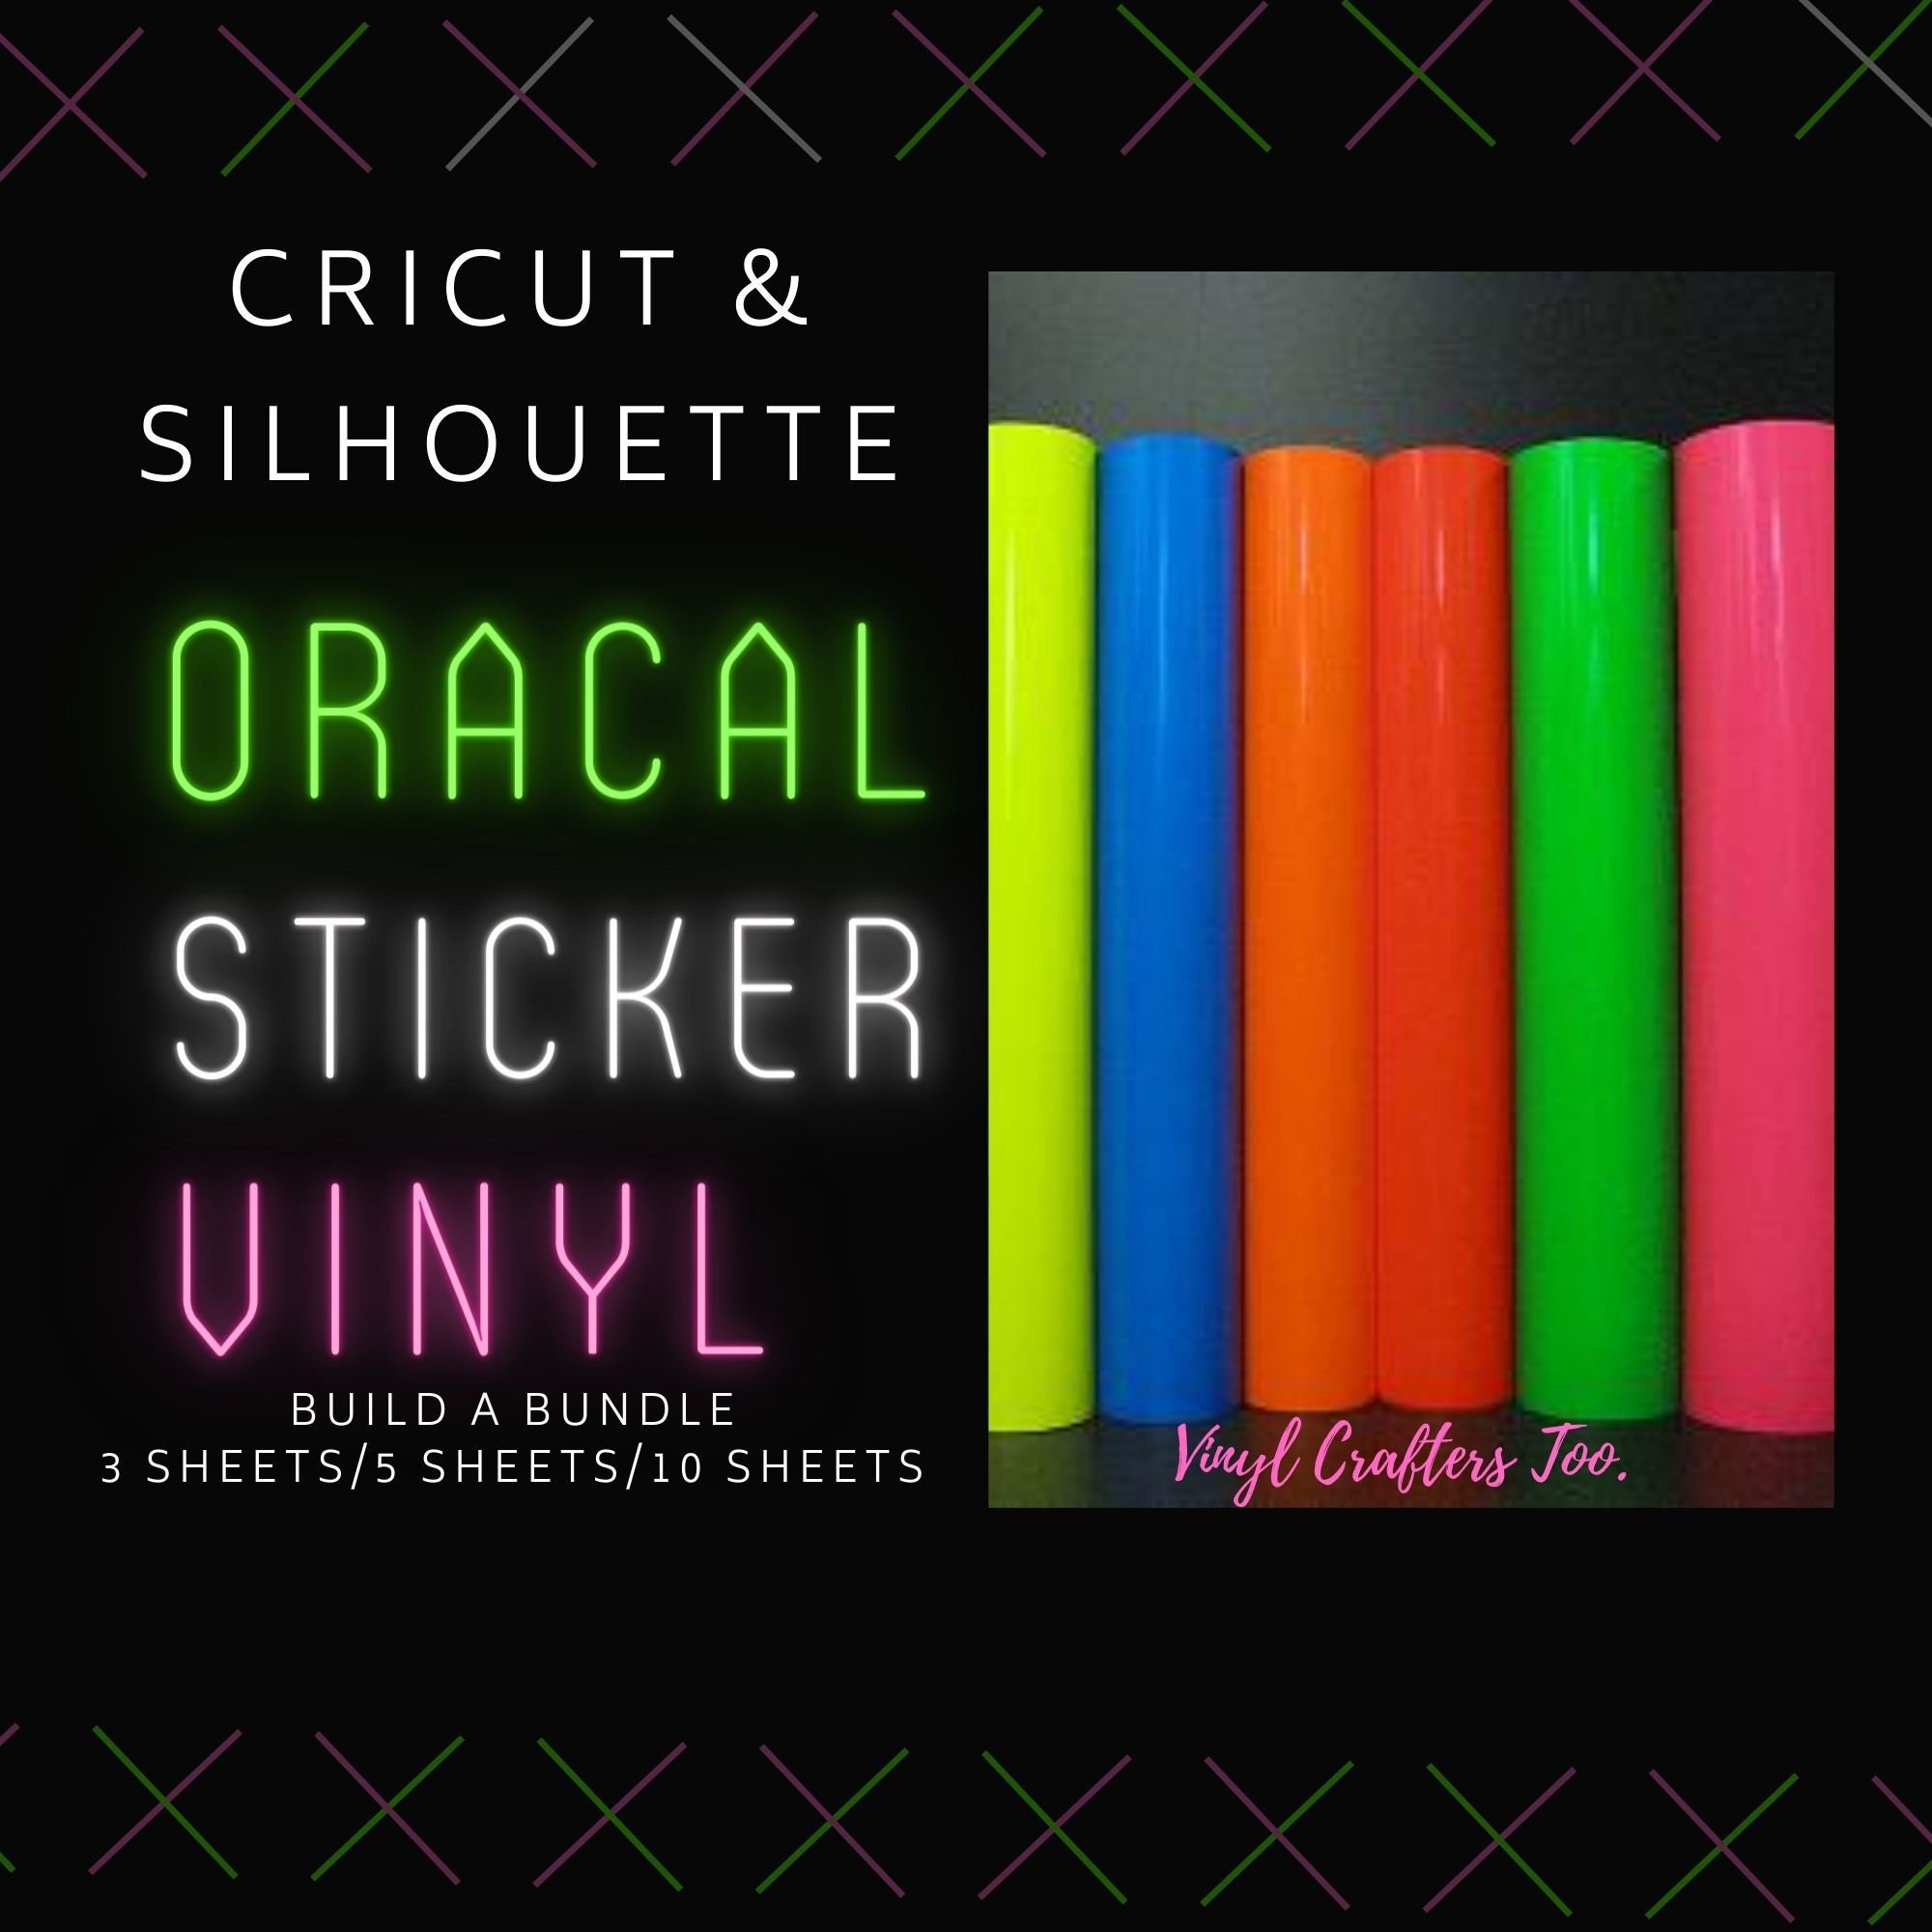 ORACAL 651 Popular Pack - Adhesive Craft Vinyl for Cricut, Silhouette,  Cameo, Craft Cutters, Printers, and Decals ((63) Sheets)